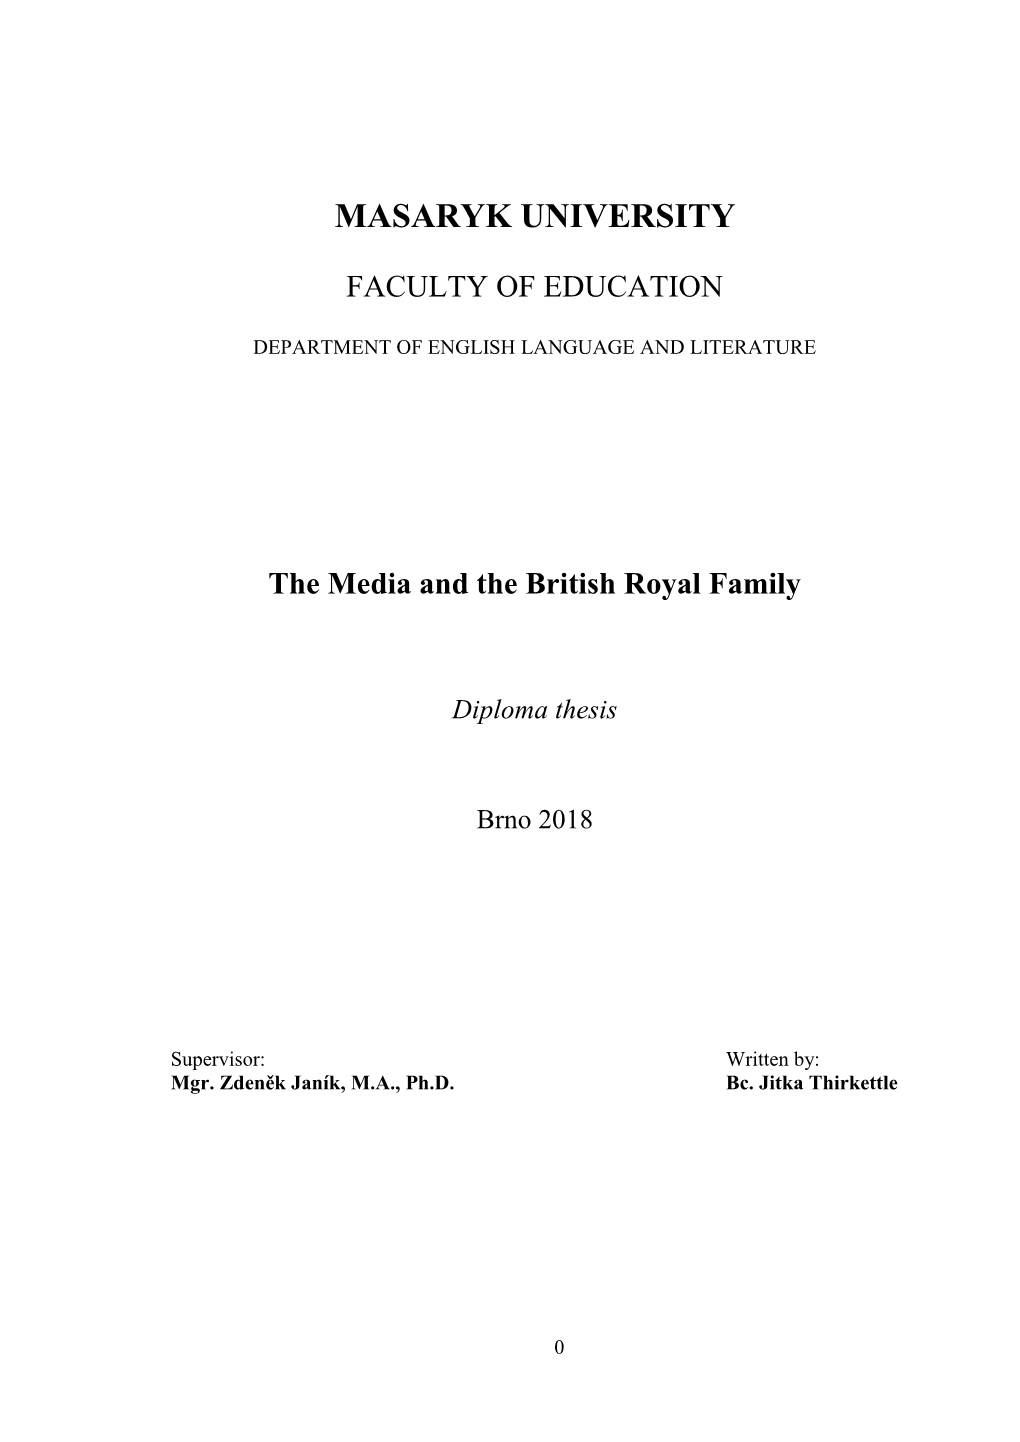 The Media and the British Royal Family Diploma Thesis